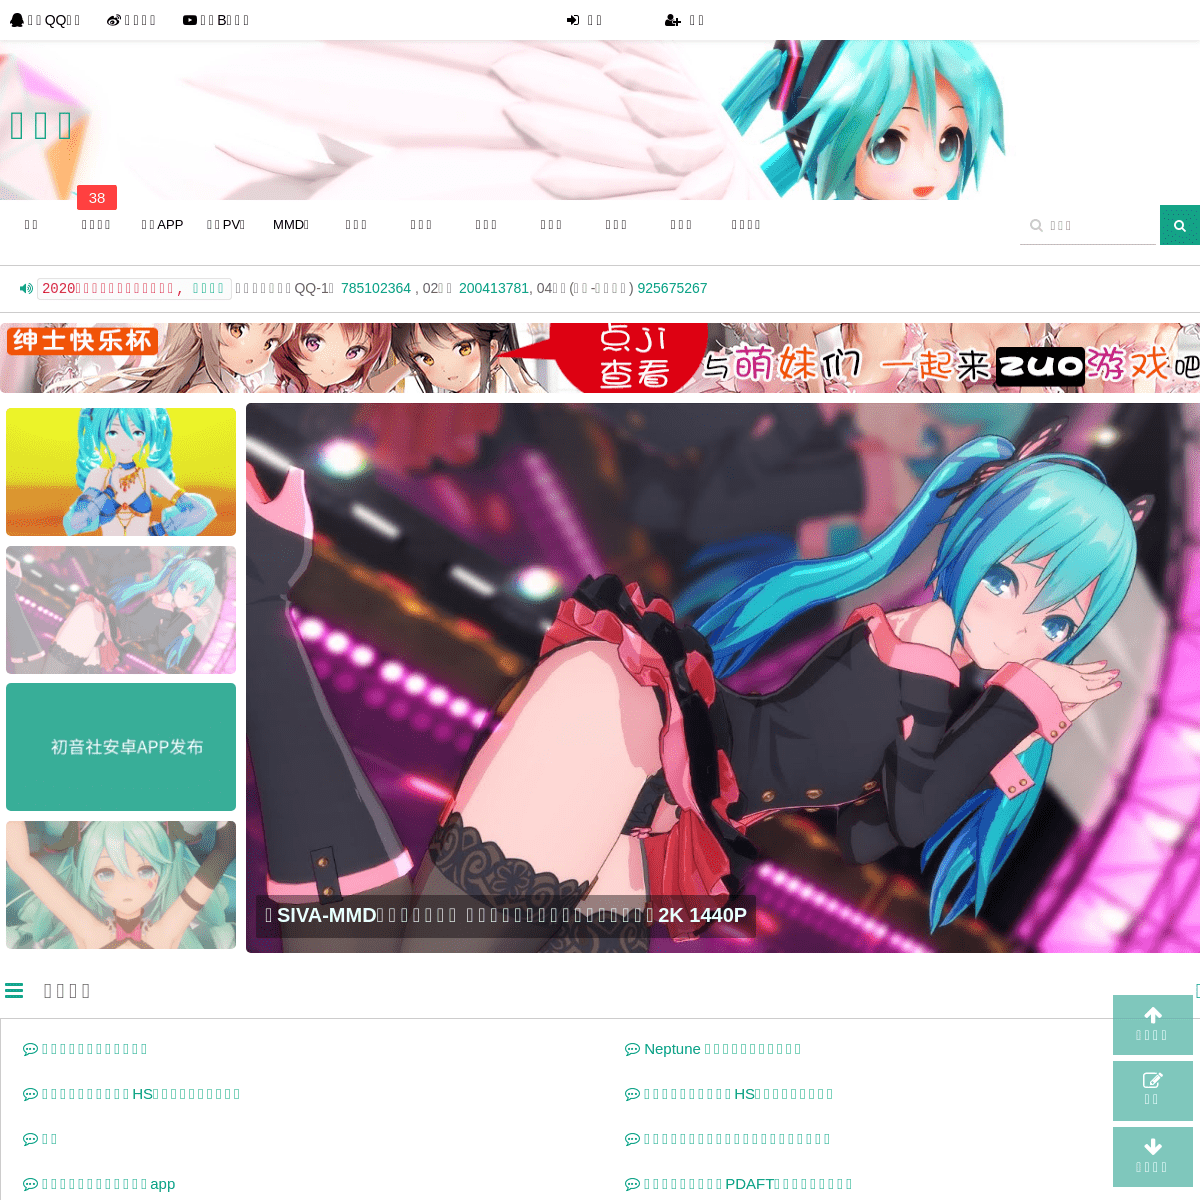 A complete backup of mikuclub.cn